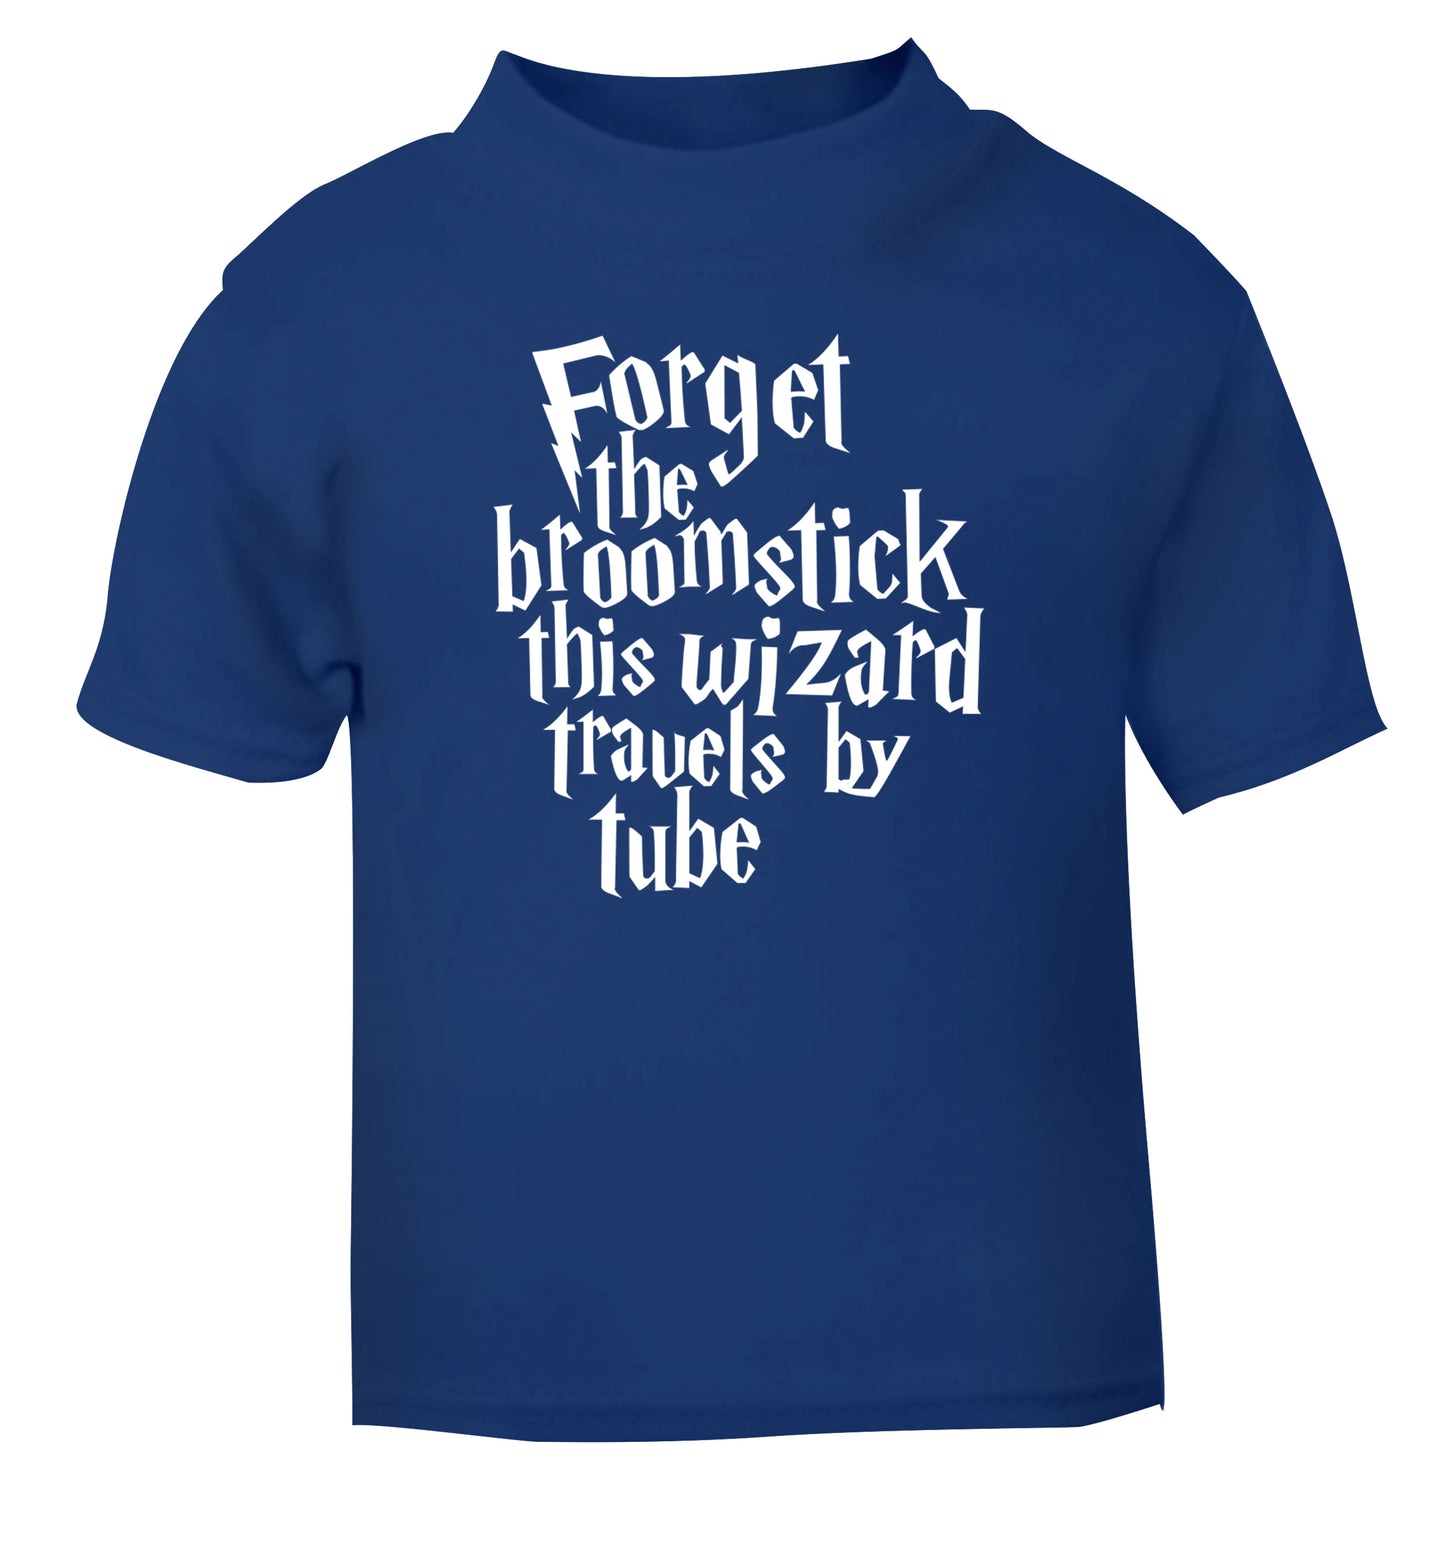 Forget the broomstick this wizard travels by tube blue Baby Toddler Tshirt 2 Years